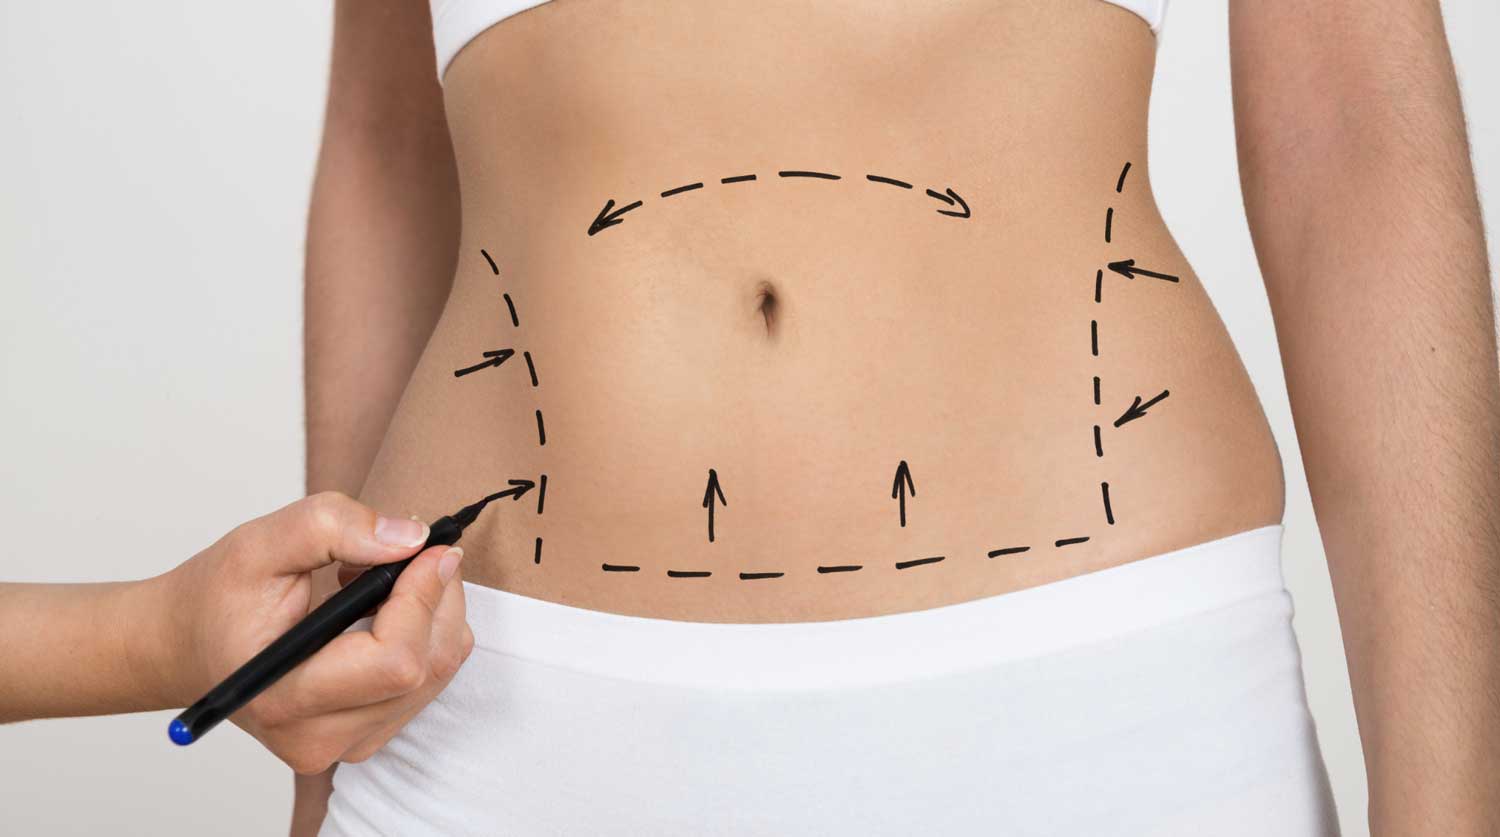 Are You A Good Candidate For A Tummy Tuck?